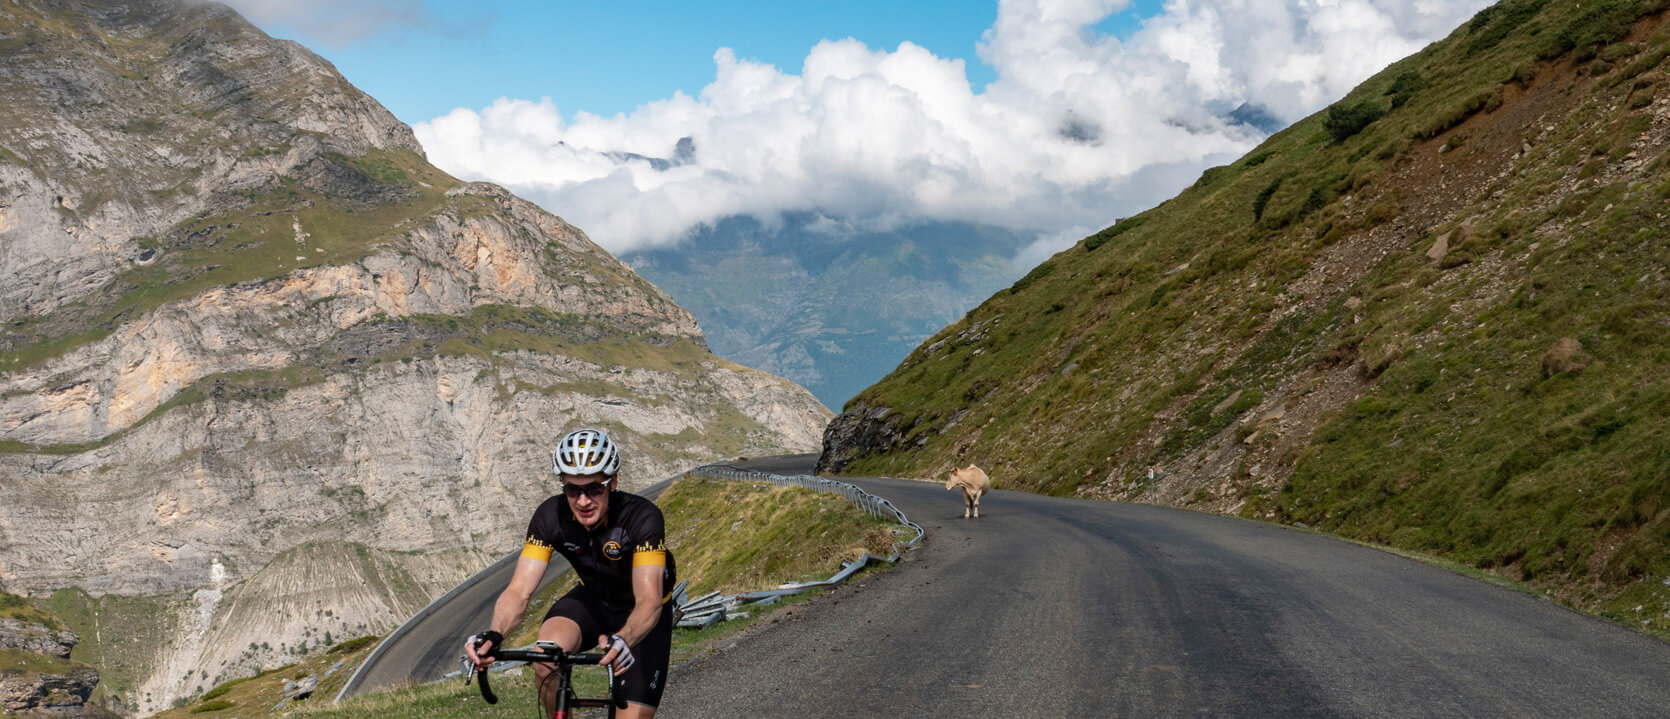 cycling up the Col de Tentes above the town of Gavarnie